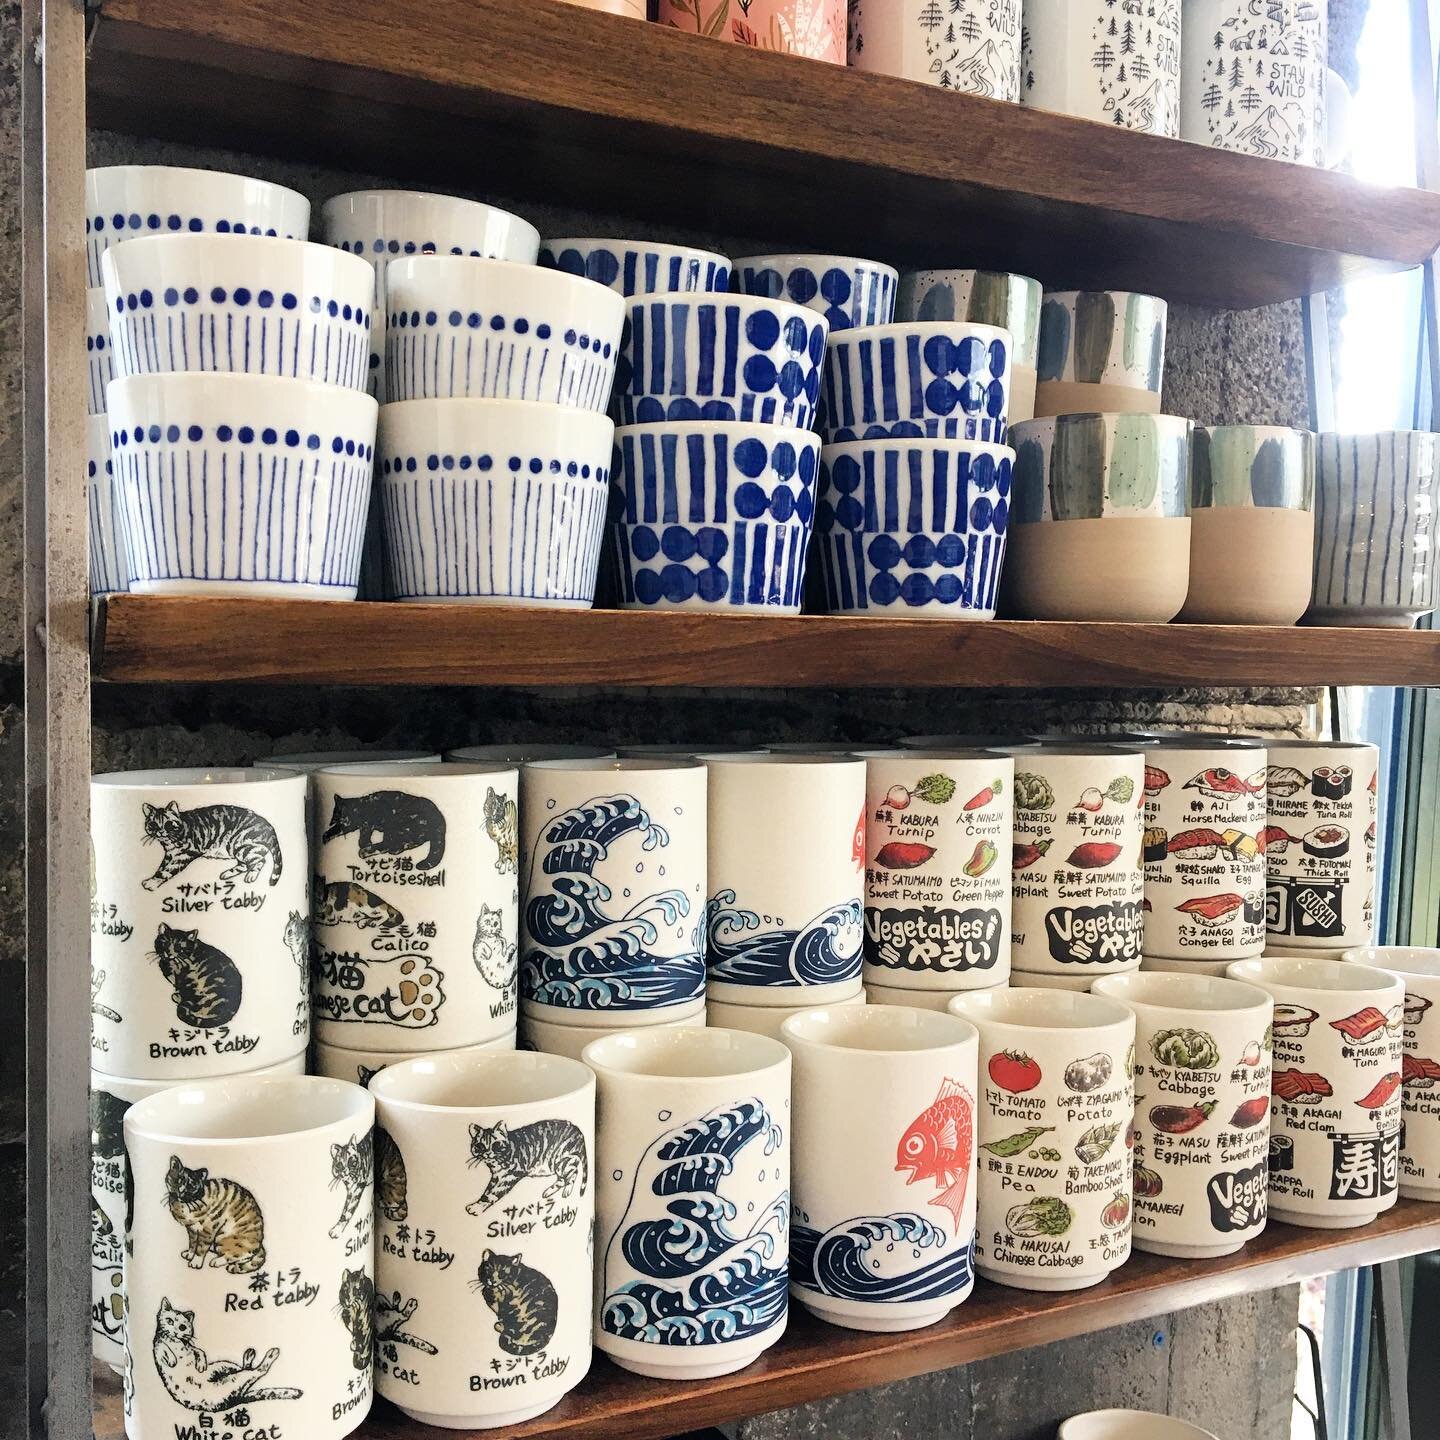 Just a few of our favorite cups that are in the shop right now! 😍 #newatnest #drinkware #cups #homegoods